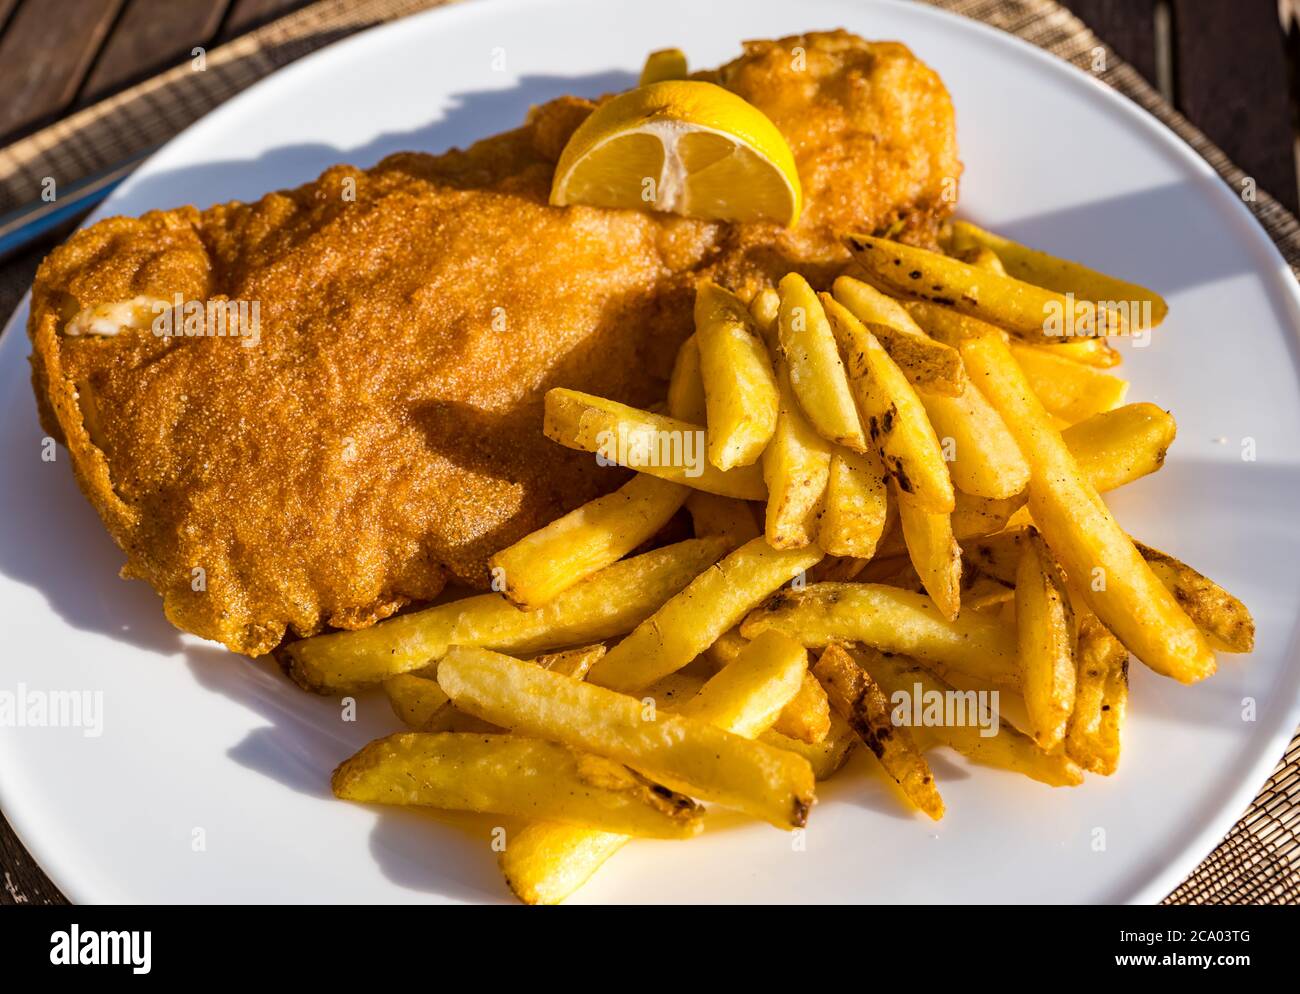 Haddock fish and chips or fish supper on plate in Summer sunshine with lemon, Scotland, UK Stock Photo